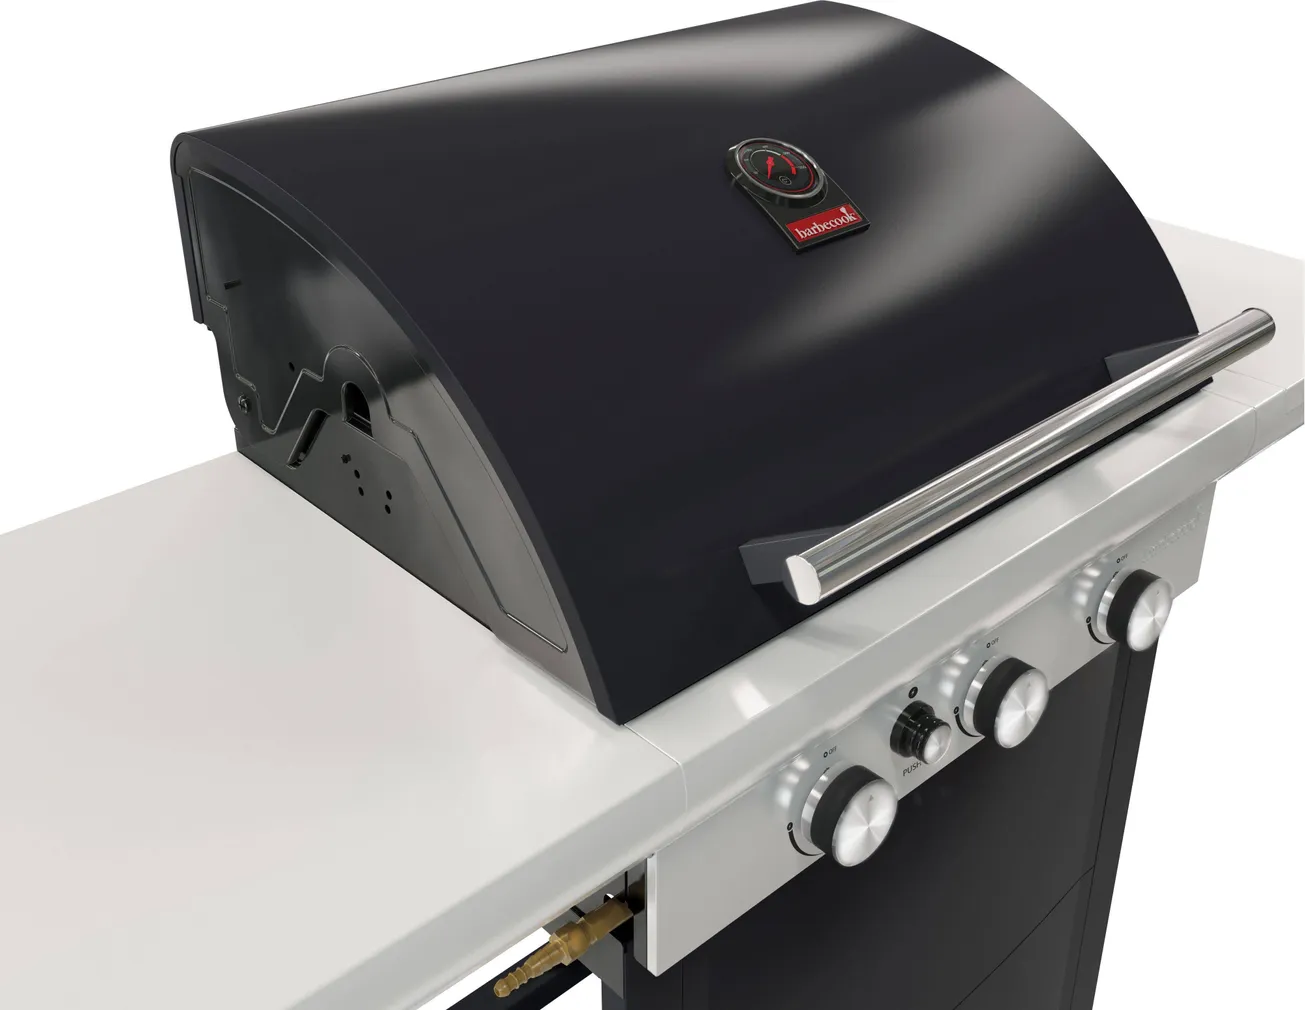 GAASIGRILL BARBECOOK SPRING 3102